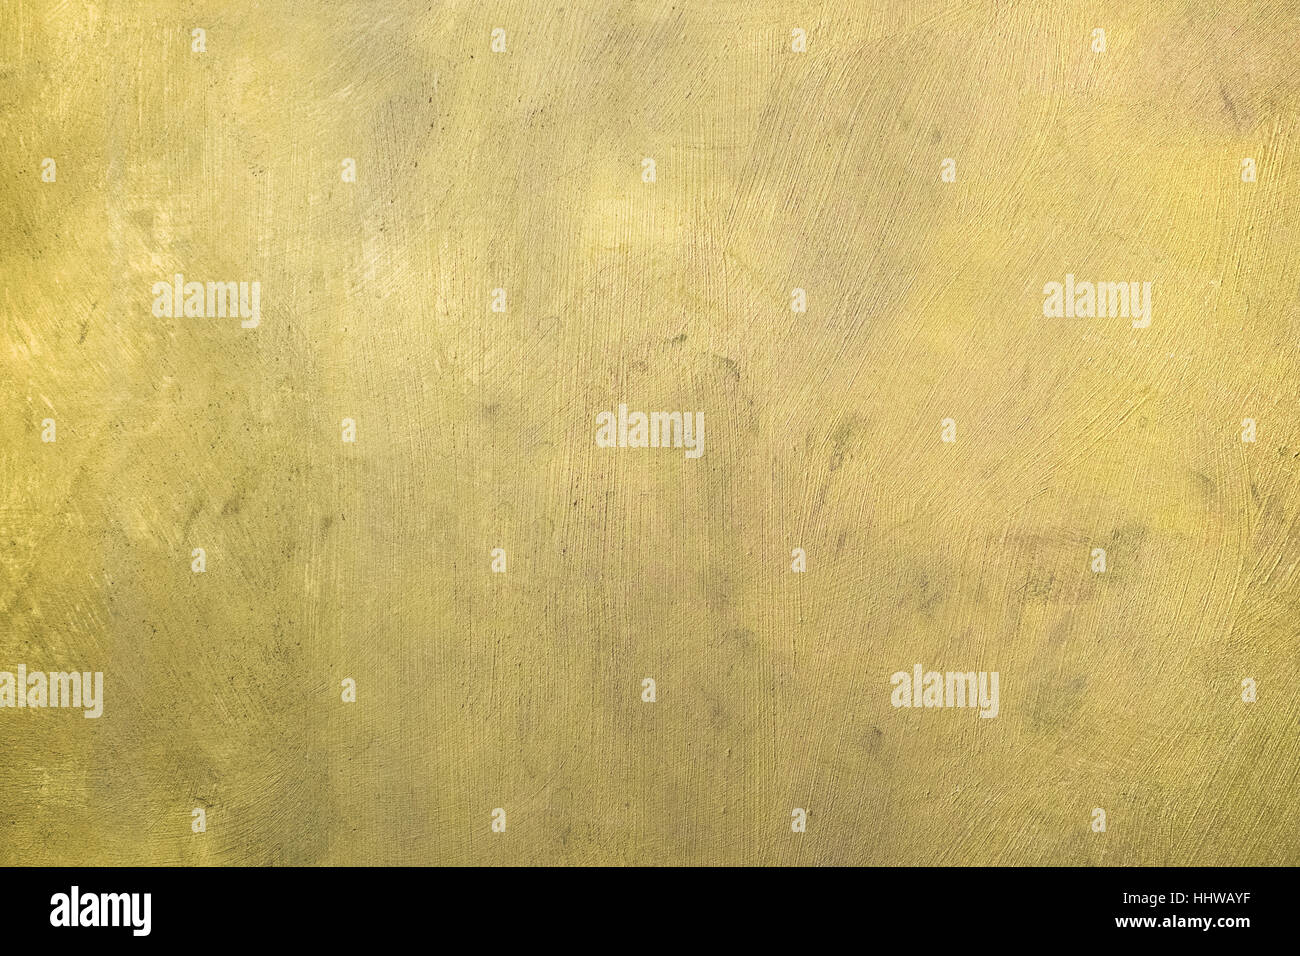 Gold like paint textured surface background Stock Photo